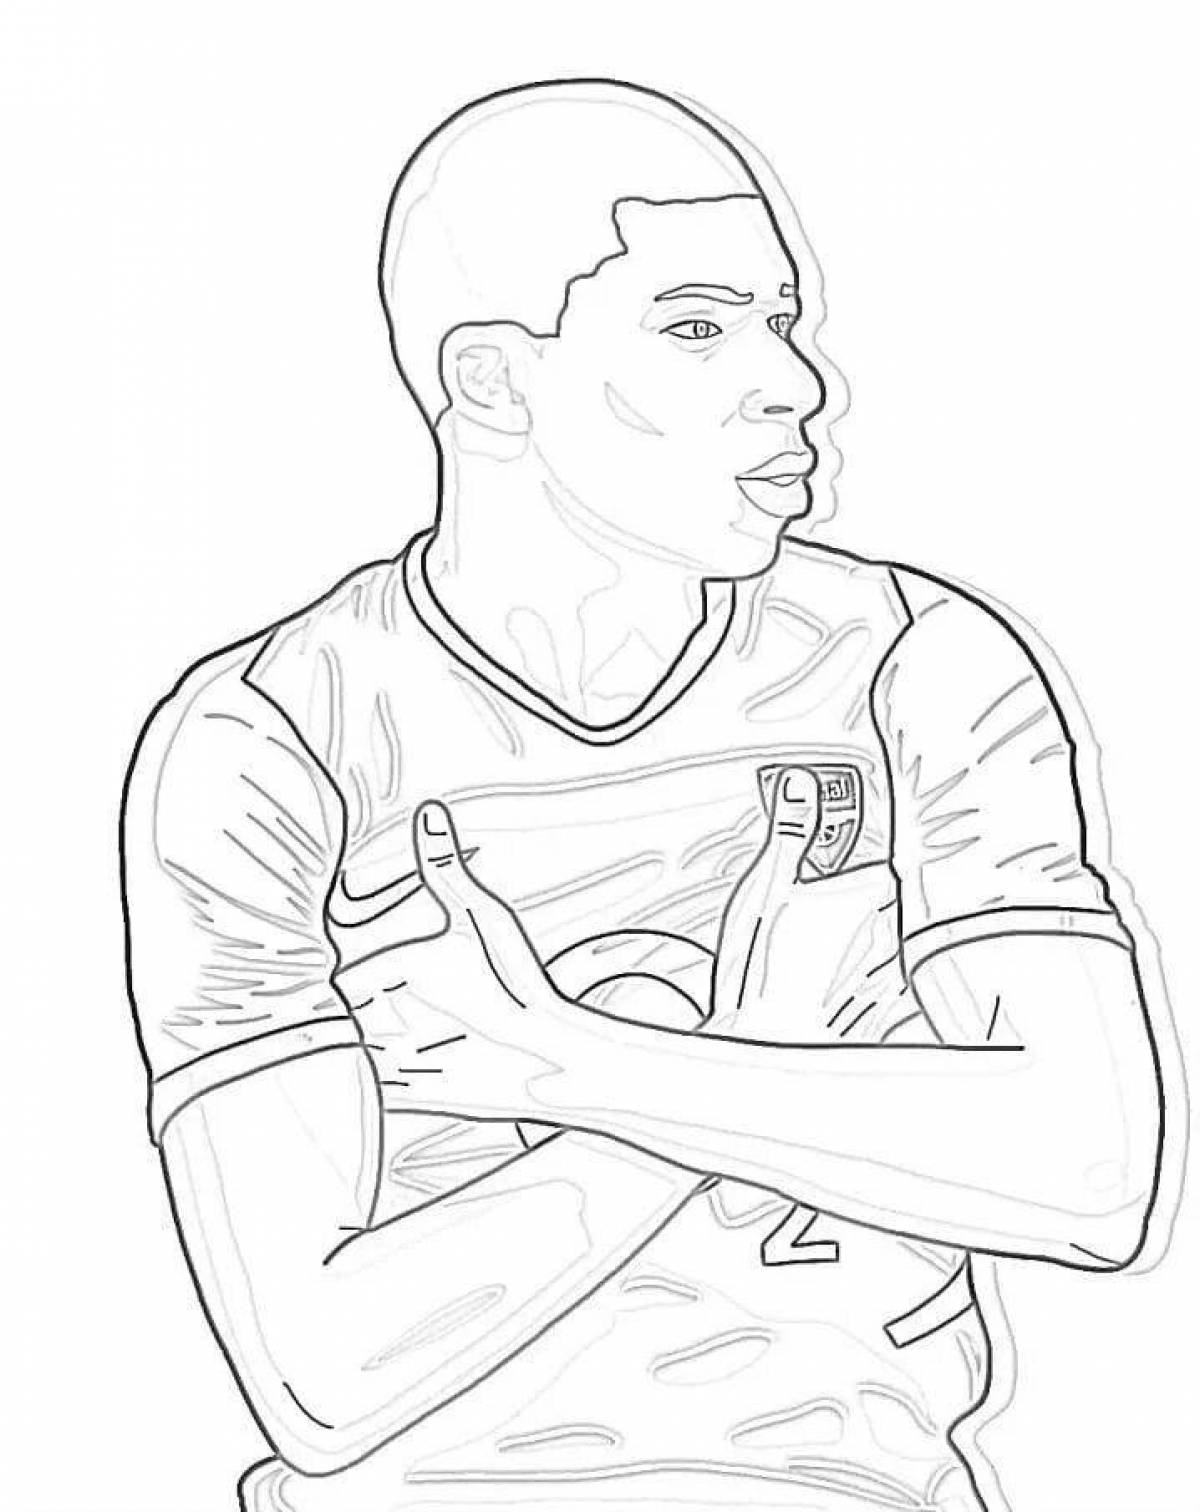 Coloring page amazing soccer player